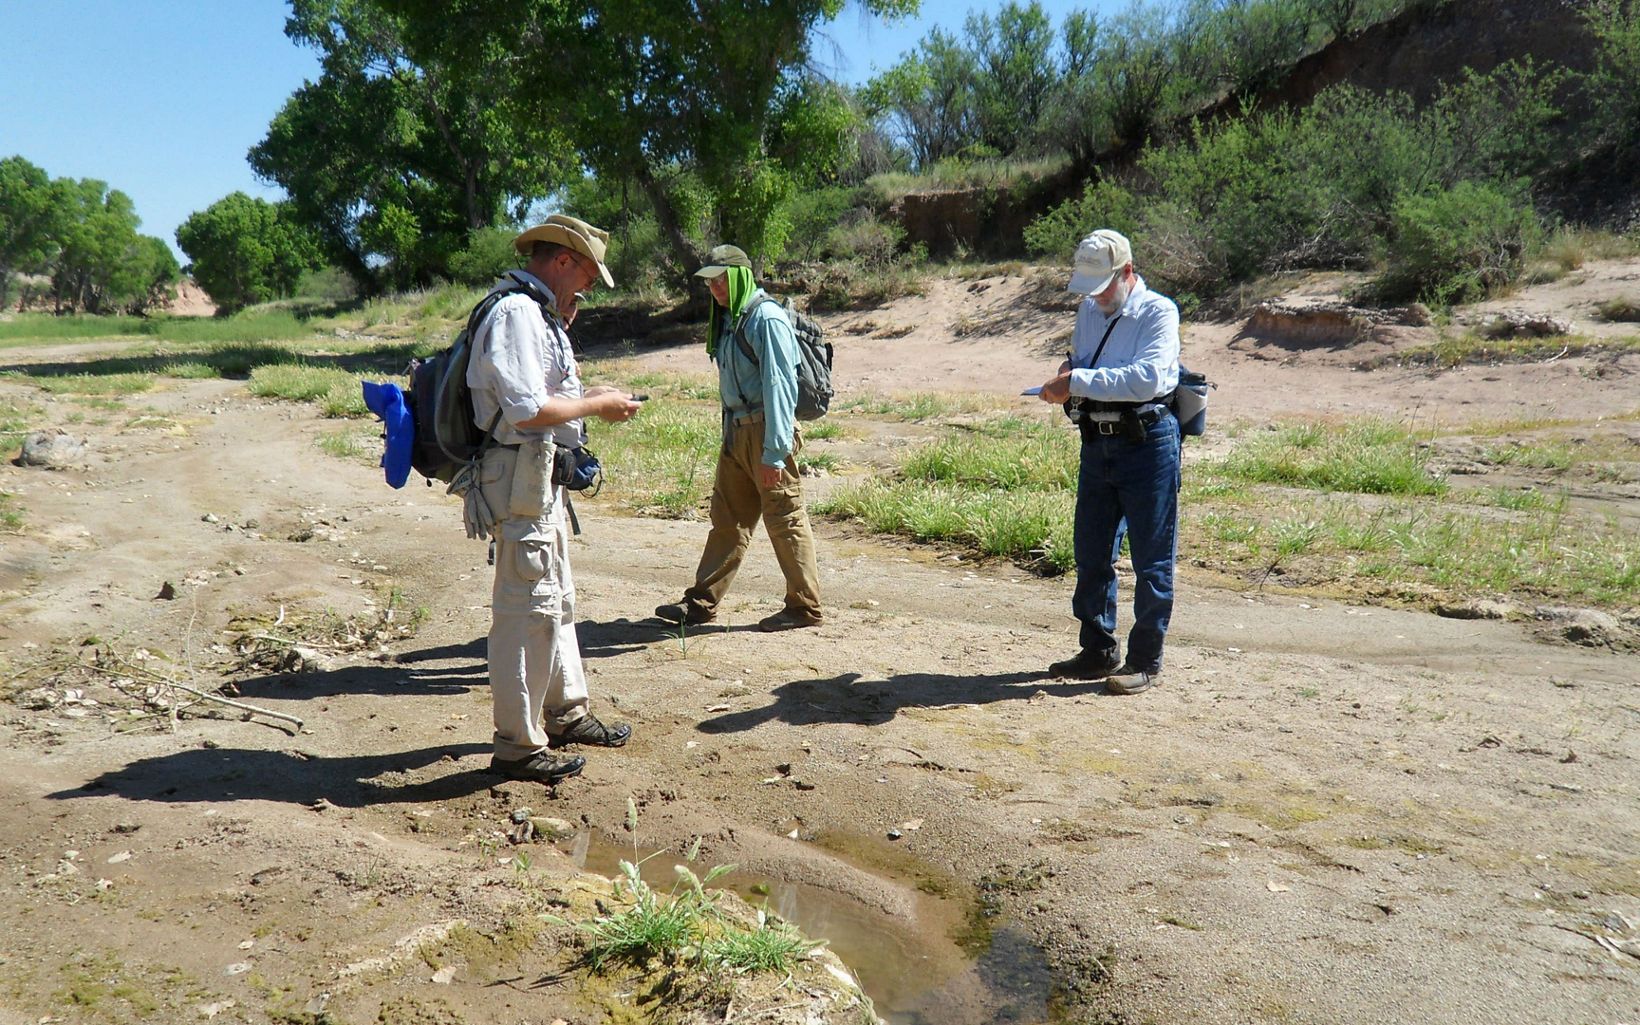 Mapping volunteers stand on a dirt path and hold GPS technology.